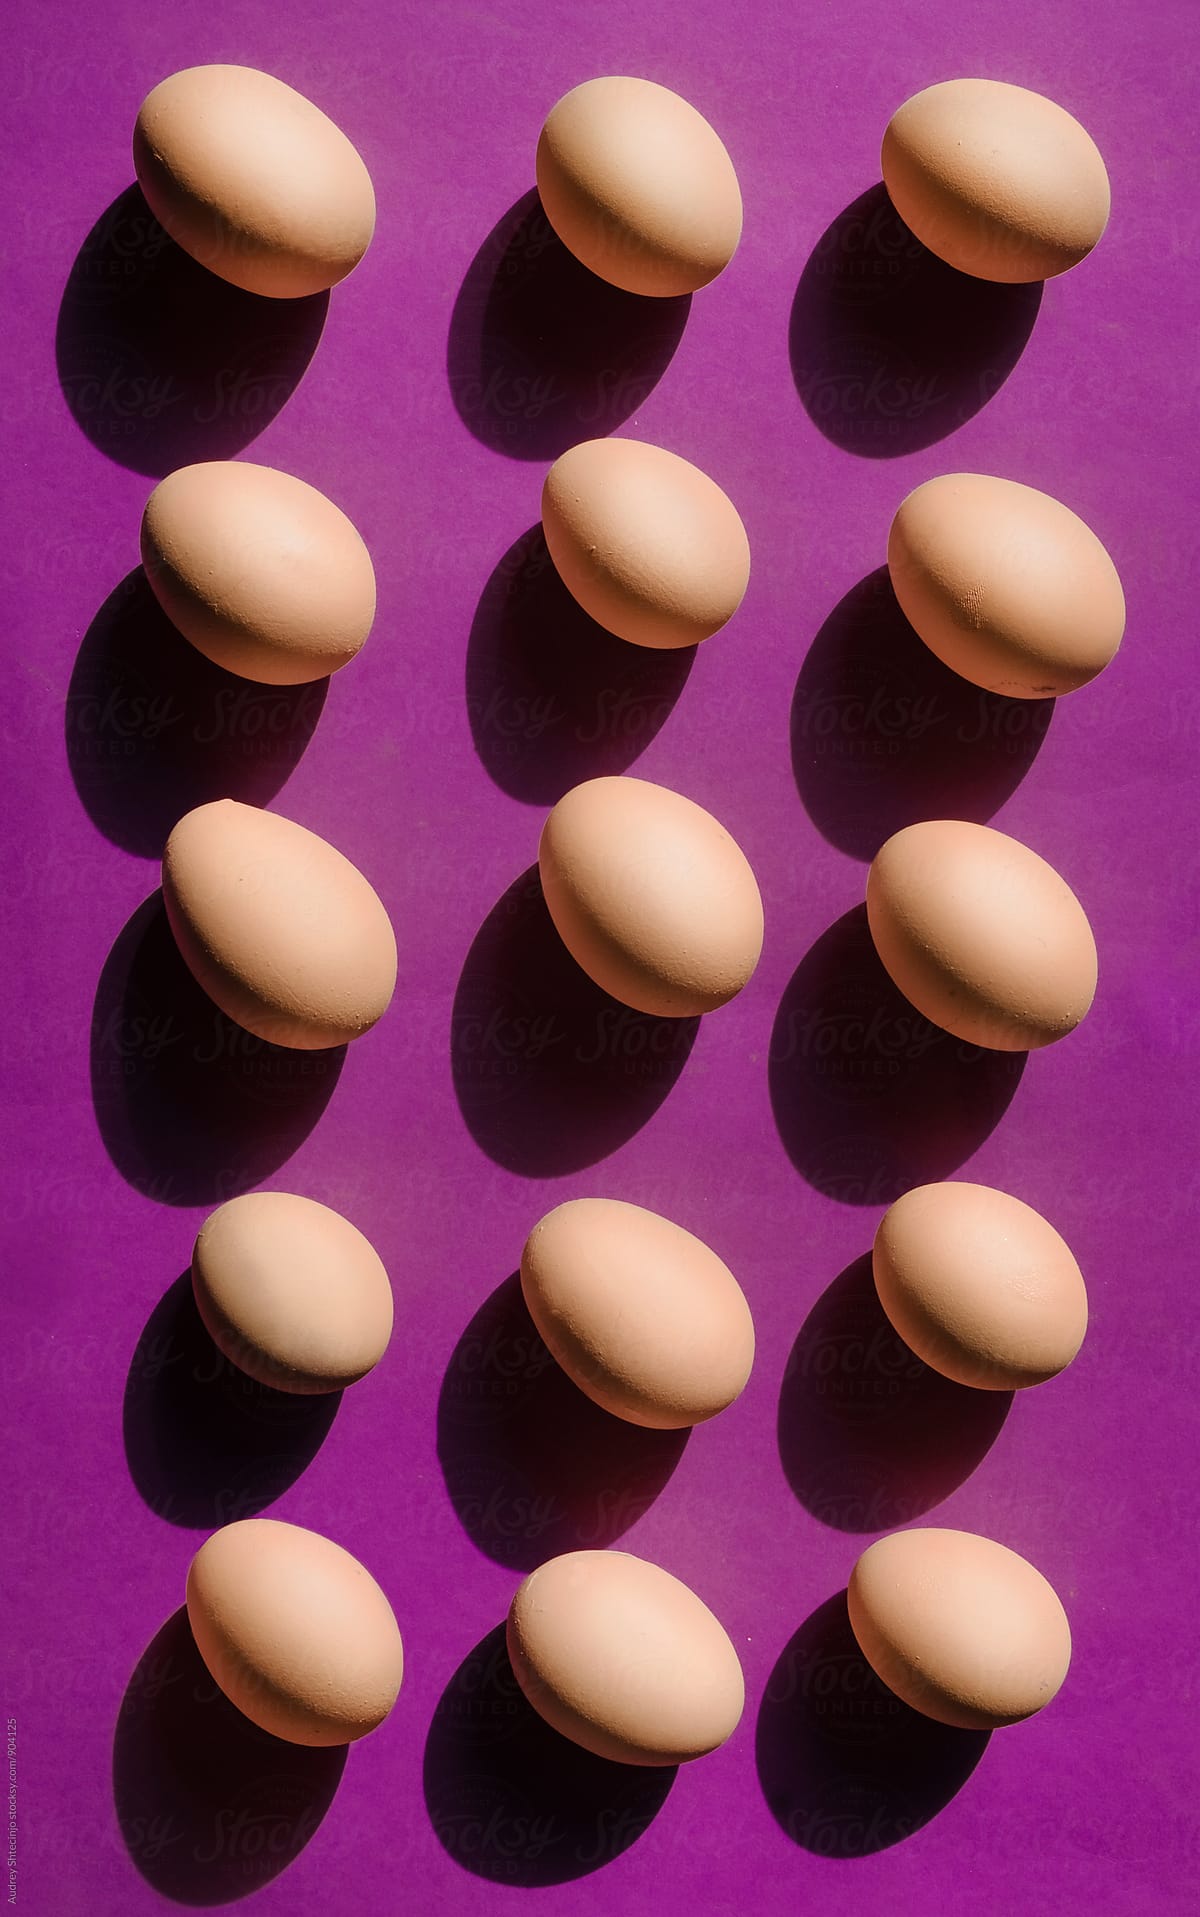 Well organised bunch of eggs on purple background